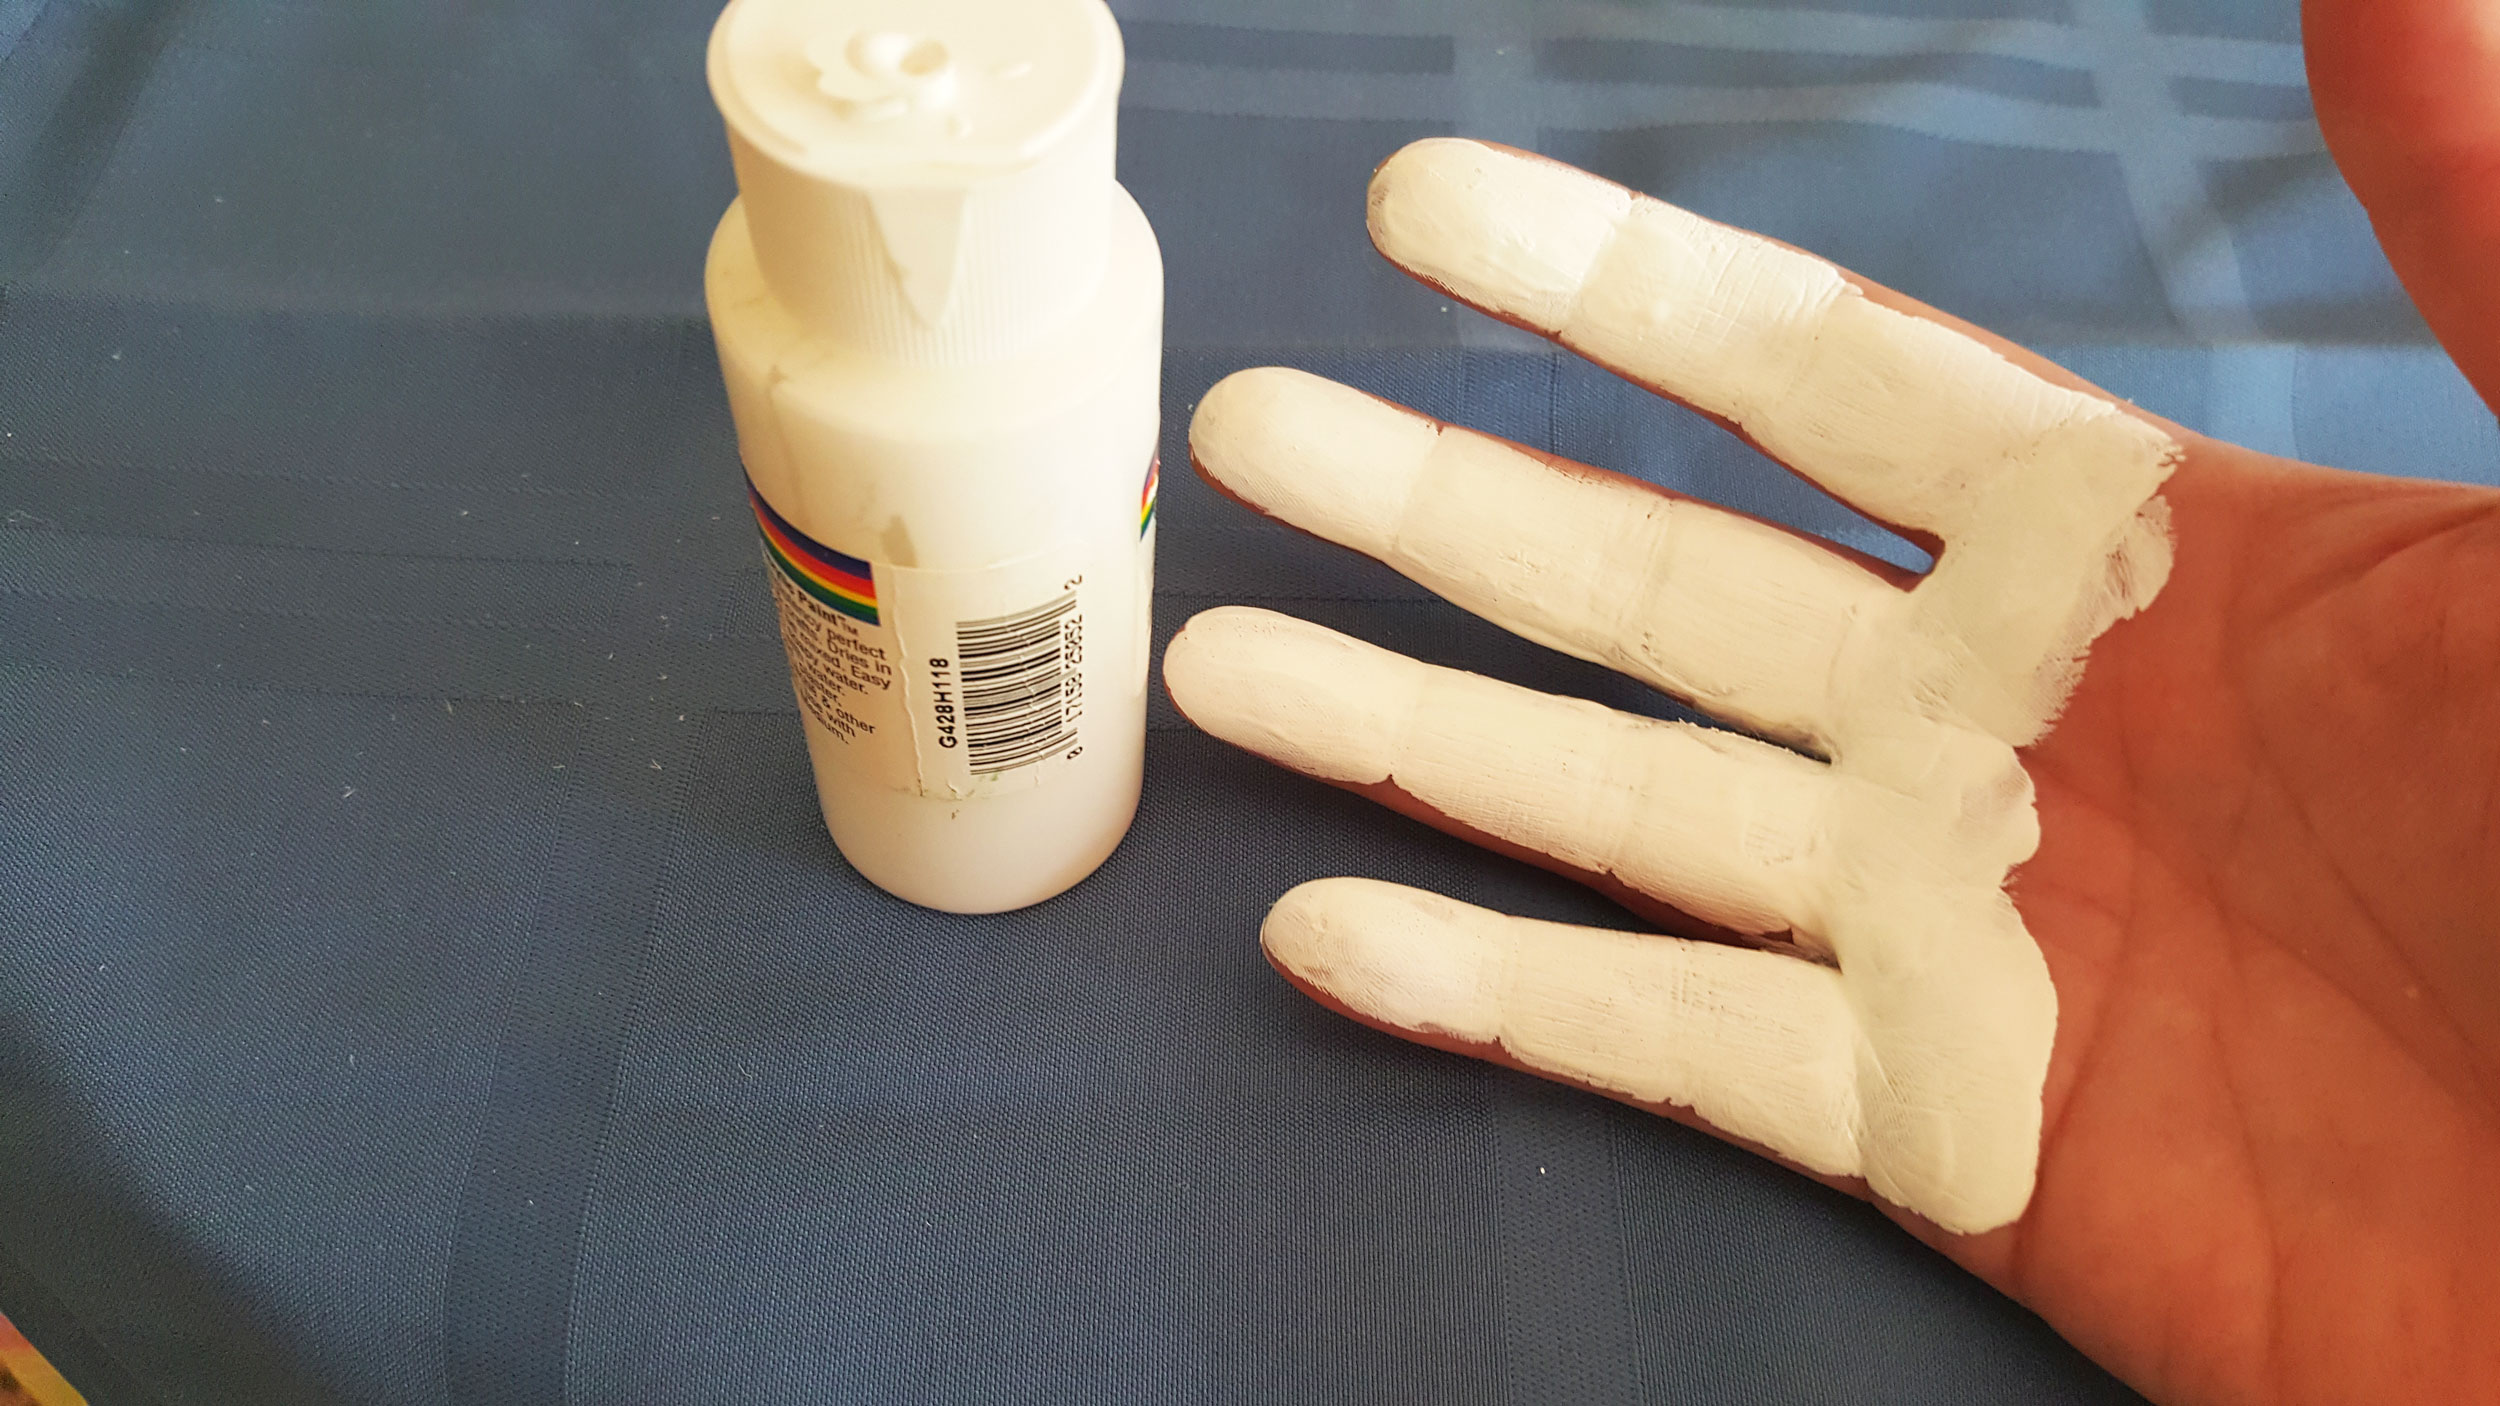 Step 2 is to coat the four fingers of your hand with white paint down to about half of your palm. | OrnamentShop.com